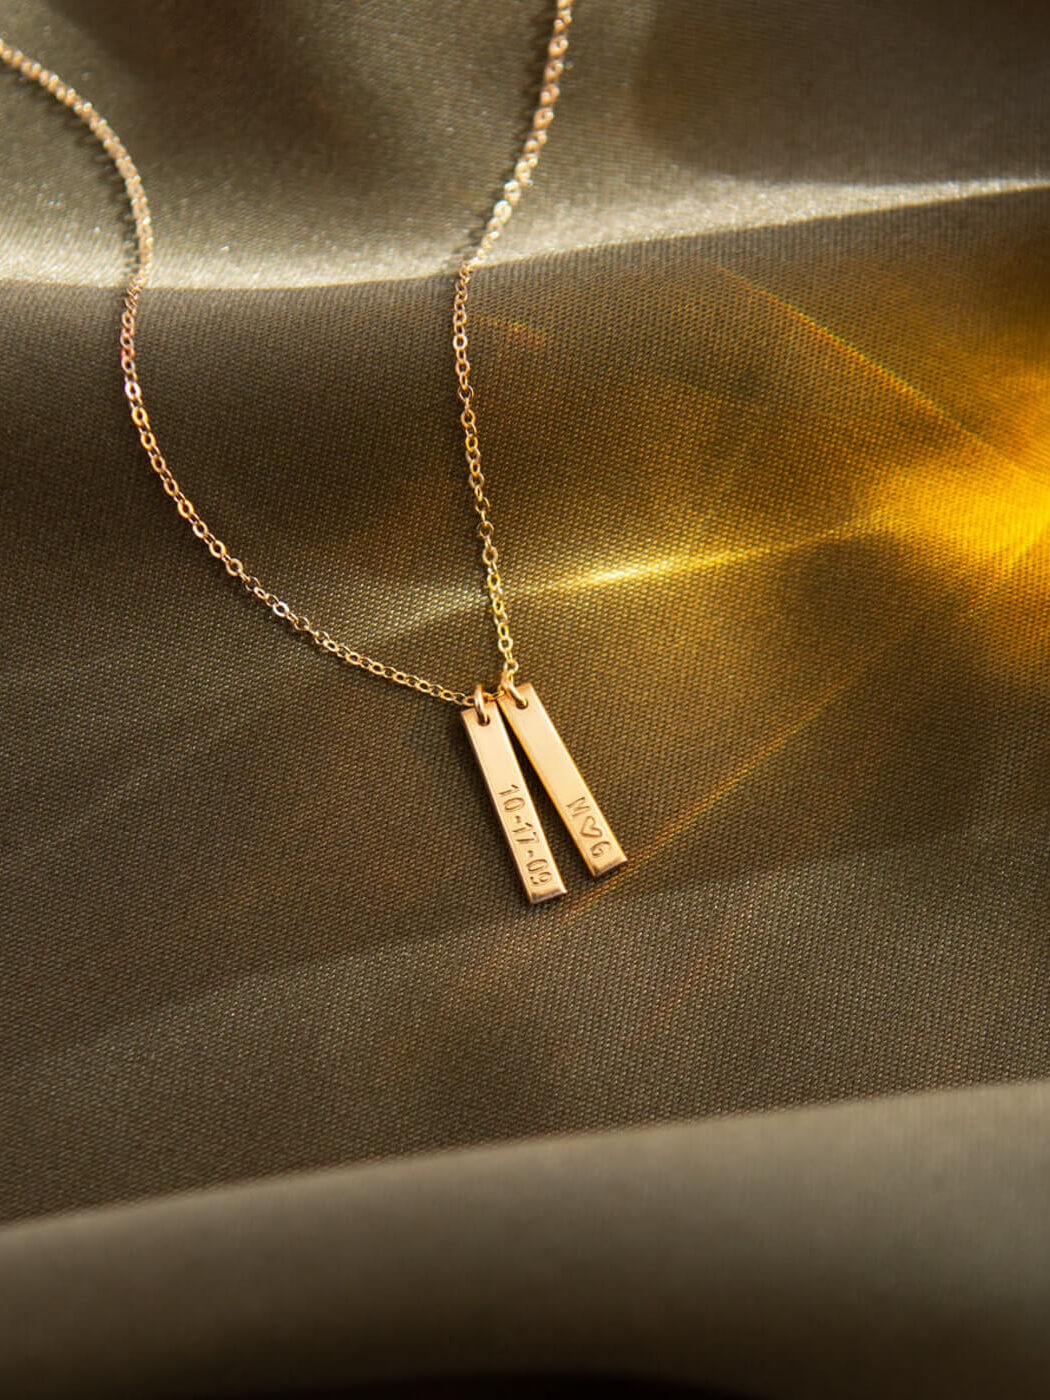 GLDN bar necklace lays on olive green fabric.